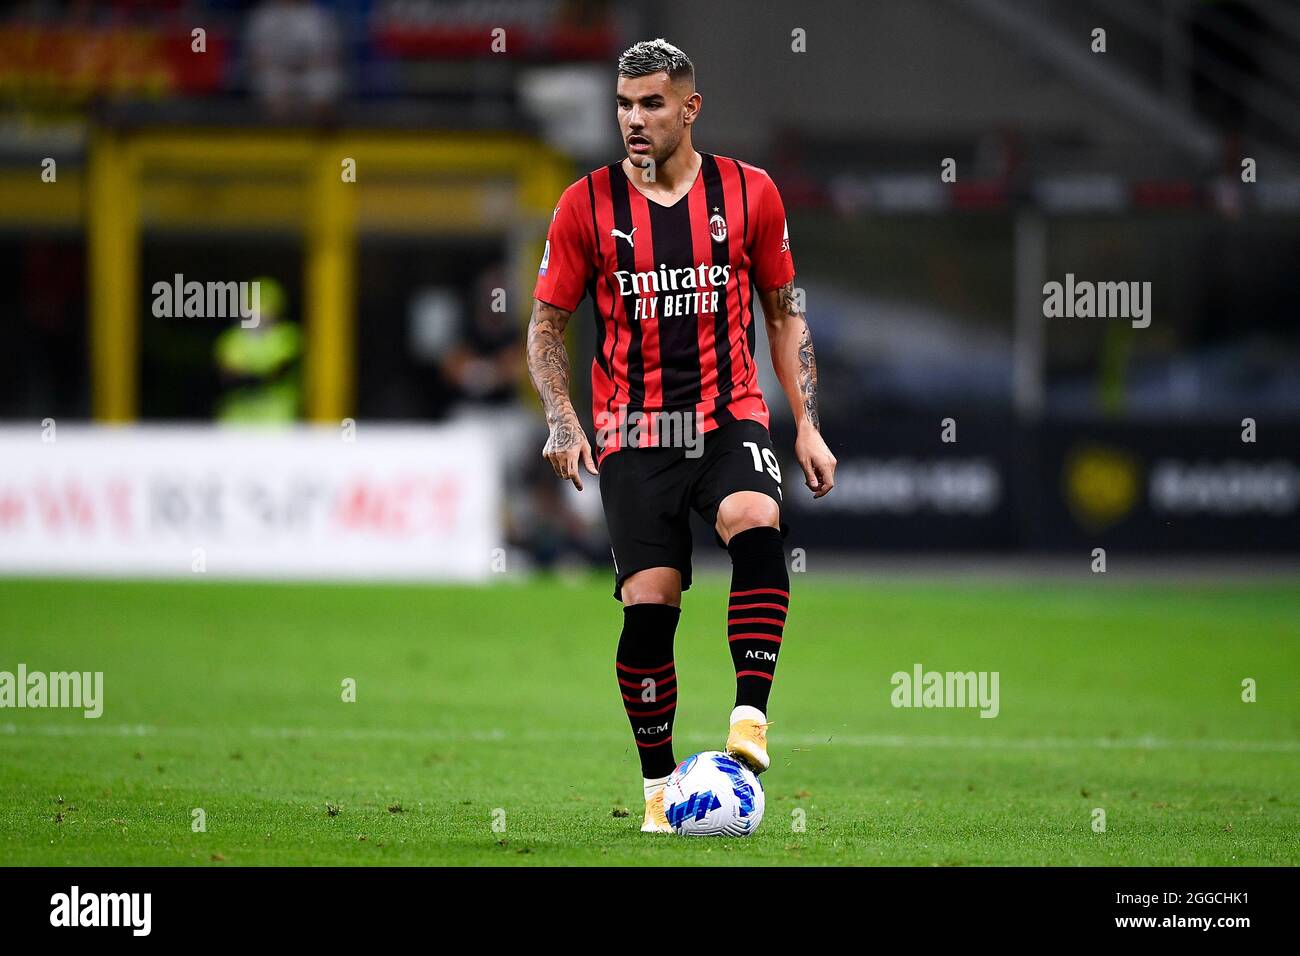 Milan, Italy. 29 August 2021. Theo Hernandez of AC Milan in action during the Serie A football match between AC Milan and Cagliari Calcio. Credit: Campo/Alamy Live News Stock Photo - Alamy